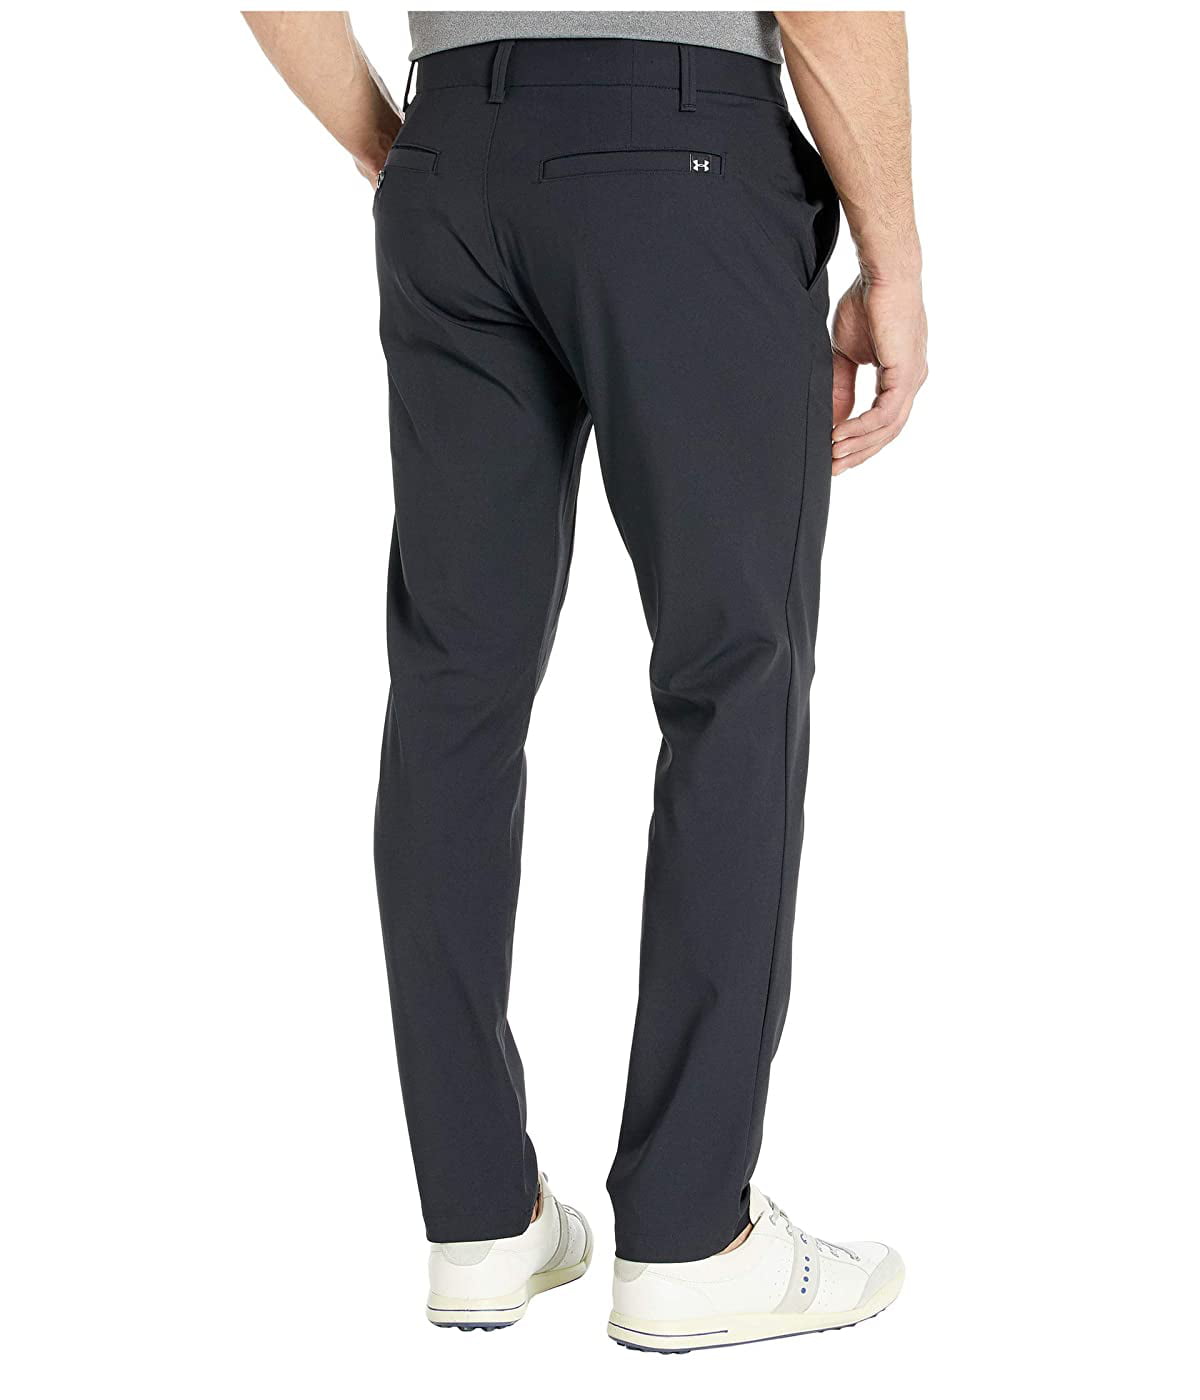 Under Armour Golf Iso-Chill Tapered Pants Black/Black - Walmart.com